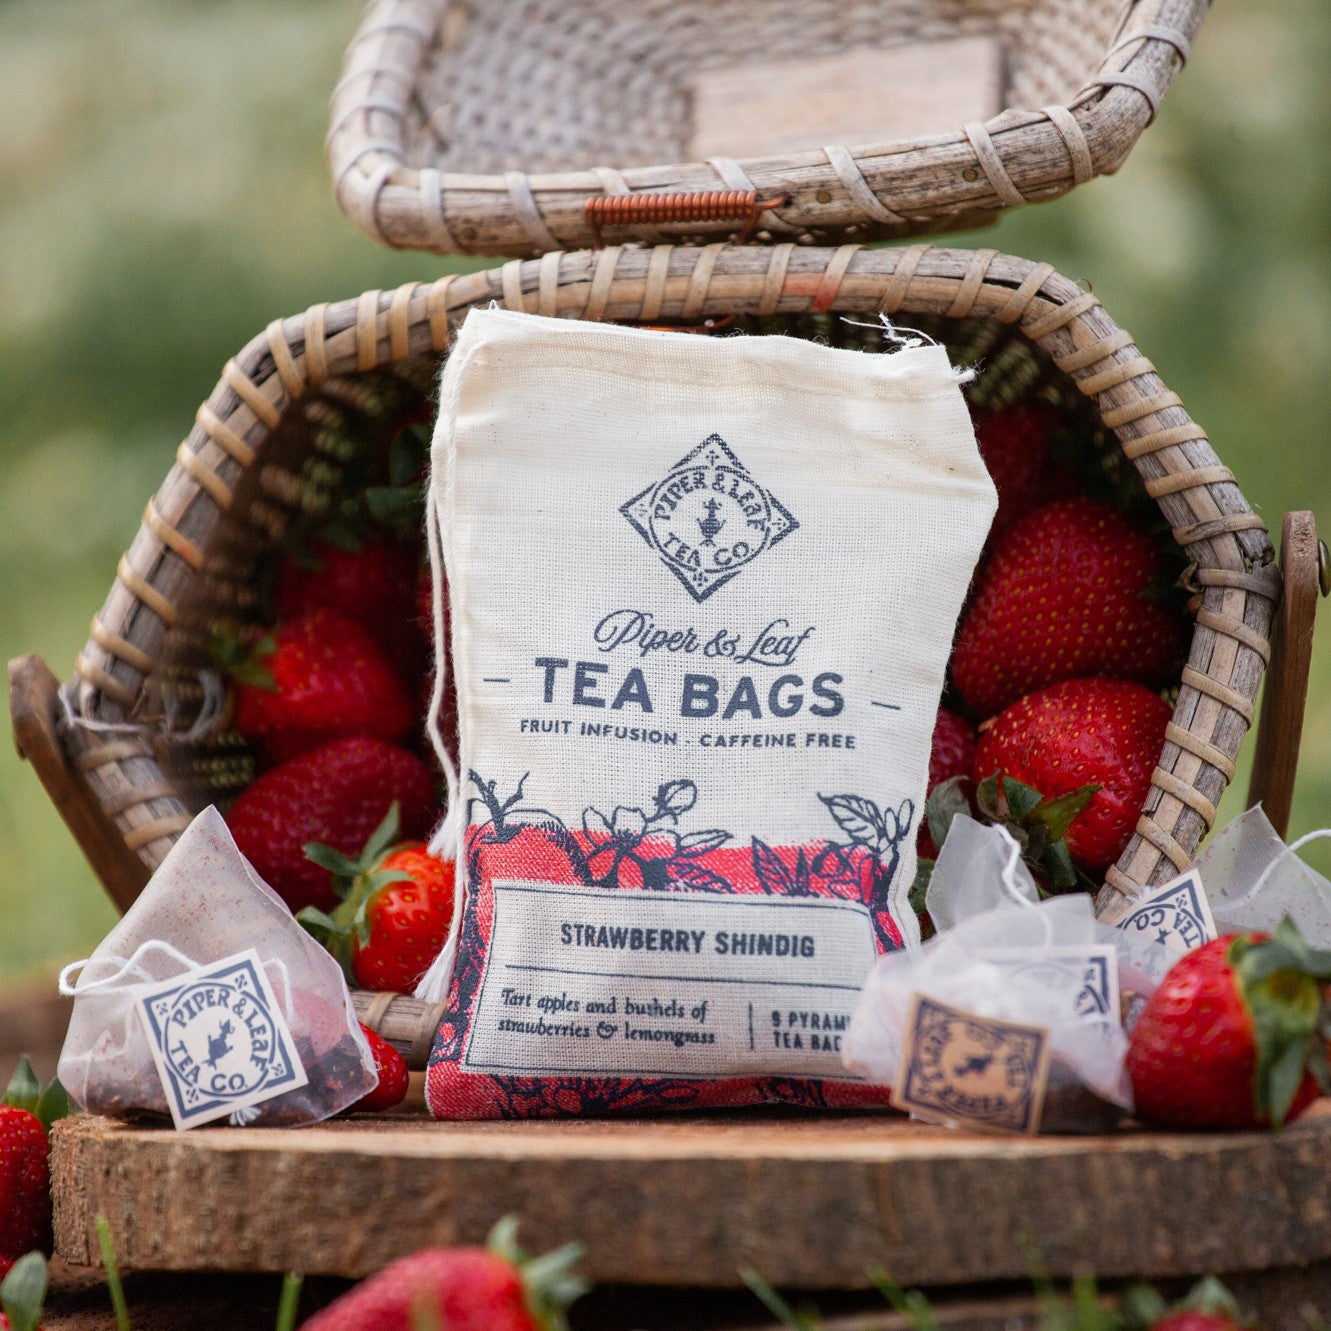 A muslin bag of 9ct sachets: Strawberry Shindig. The bag is resting amid tea bags in front of a basket overflowing with strawberries.